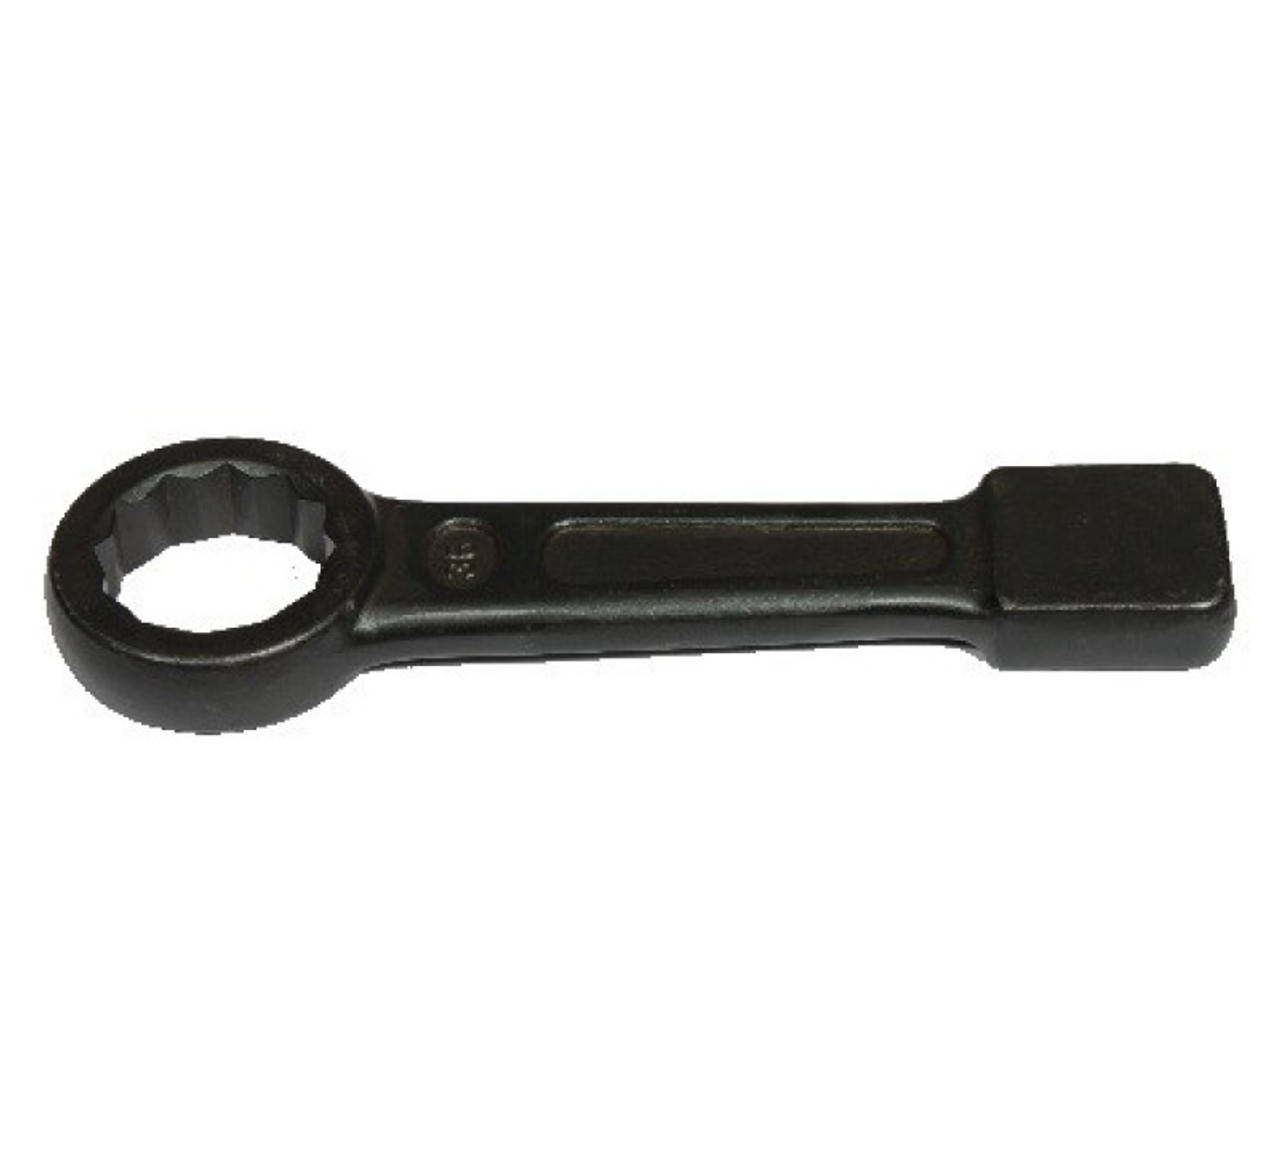 IMPA 611159 Striking wrench single open end 80 mm Kukko 133-80 (deliverytime 2 days - ex works factory)